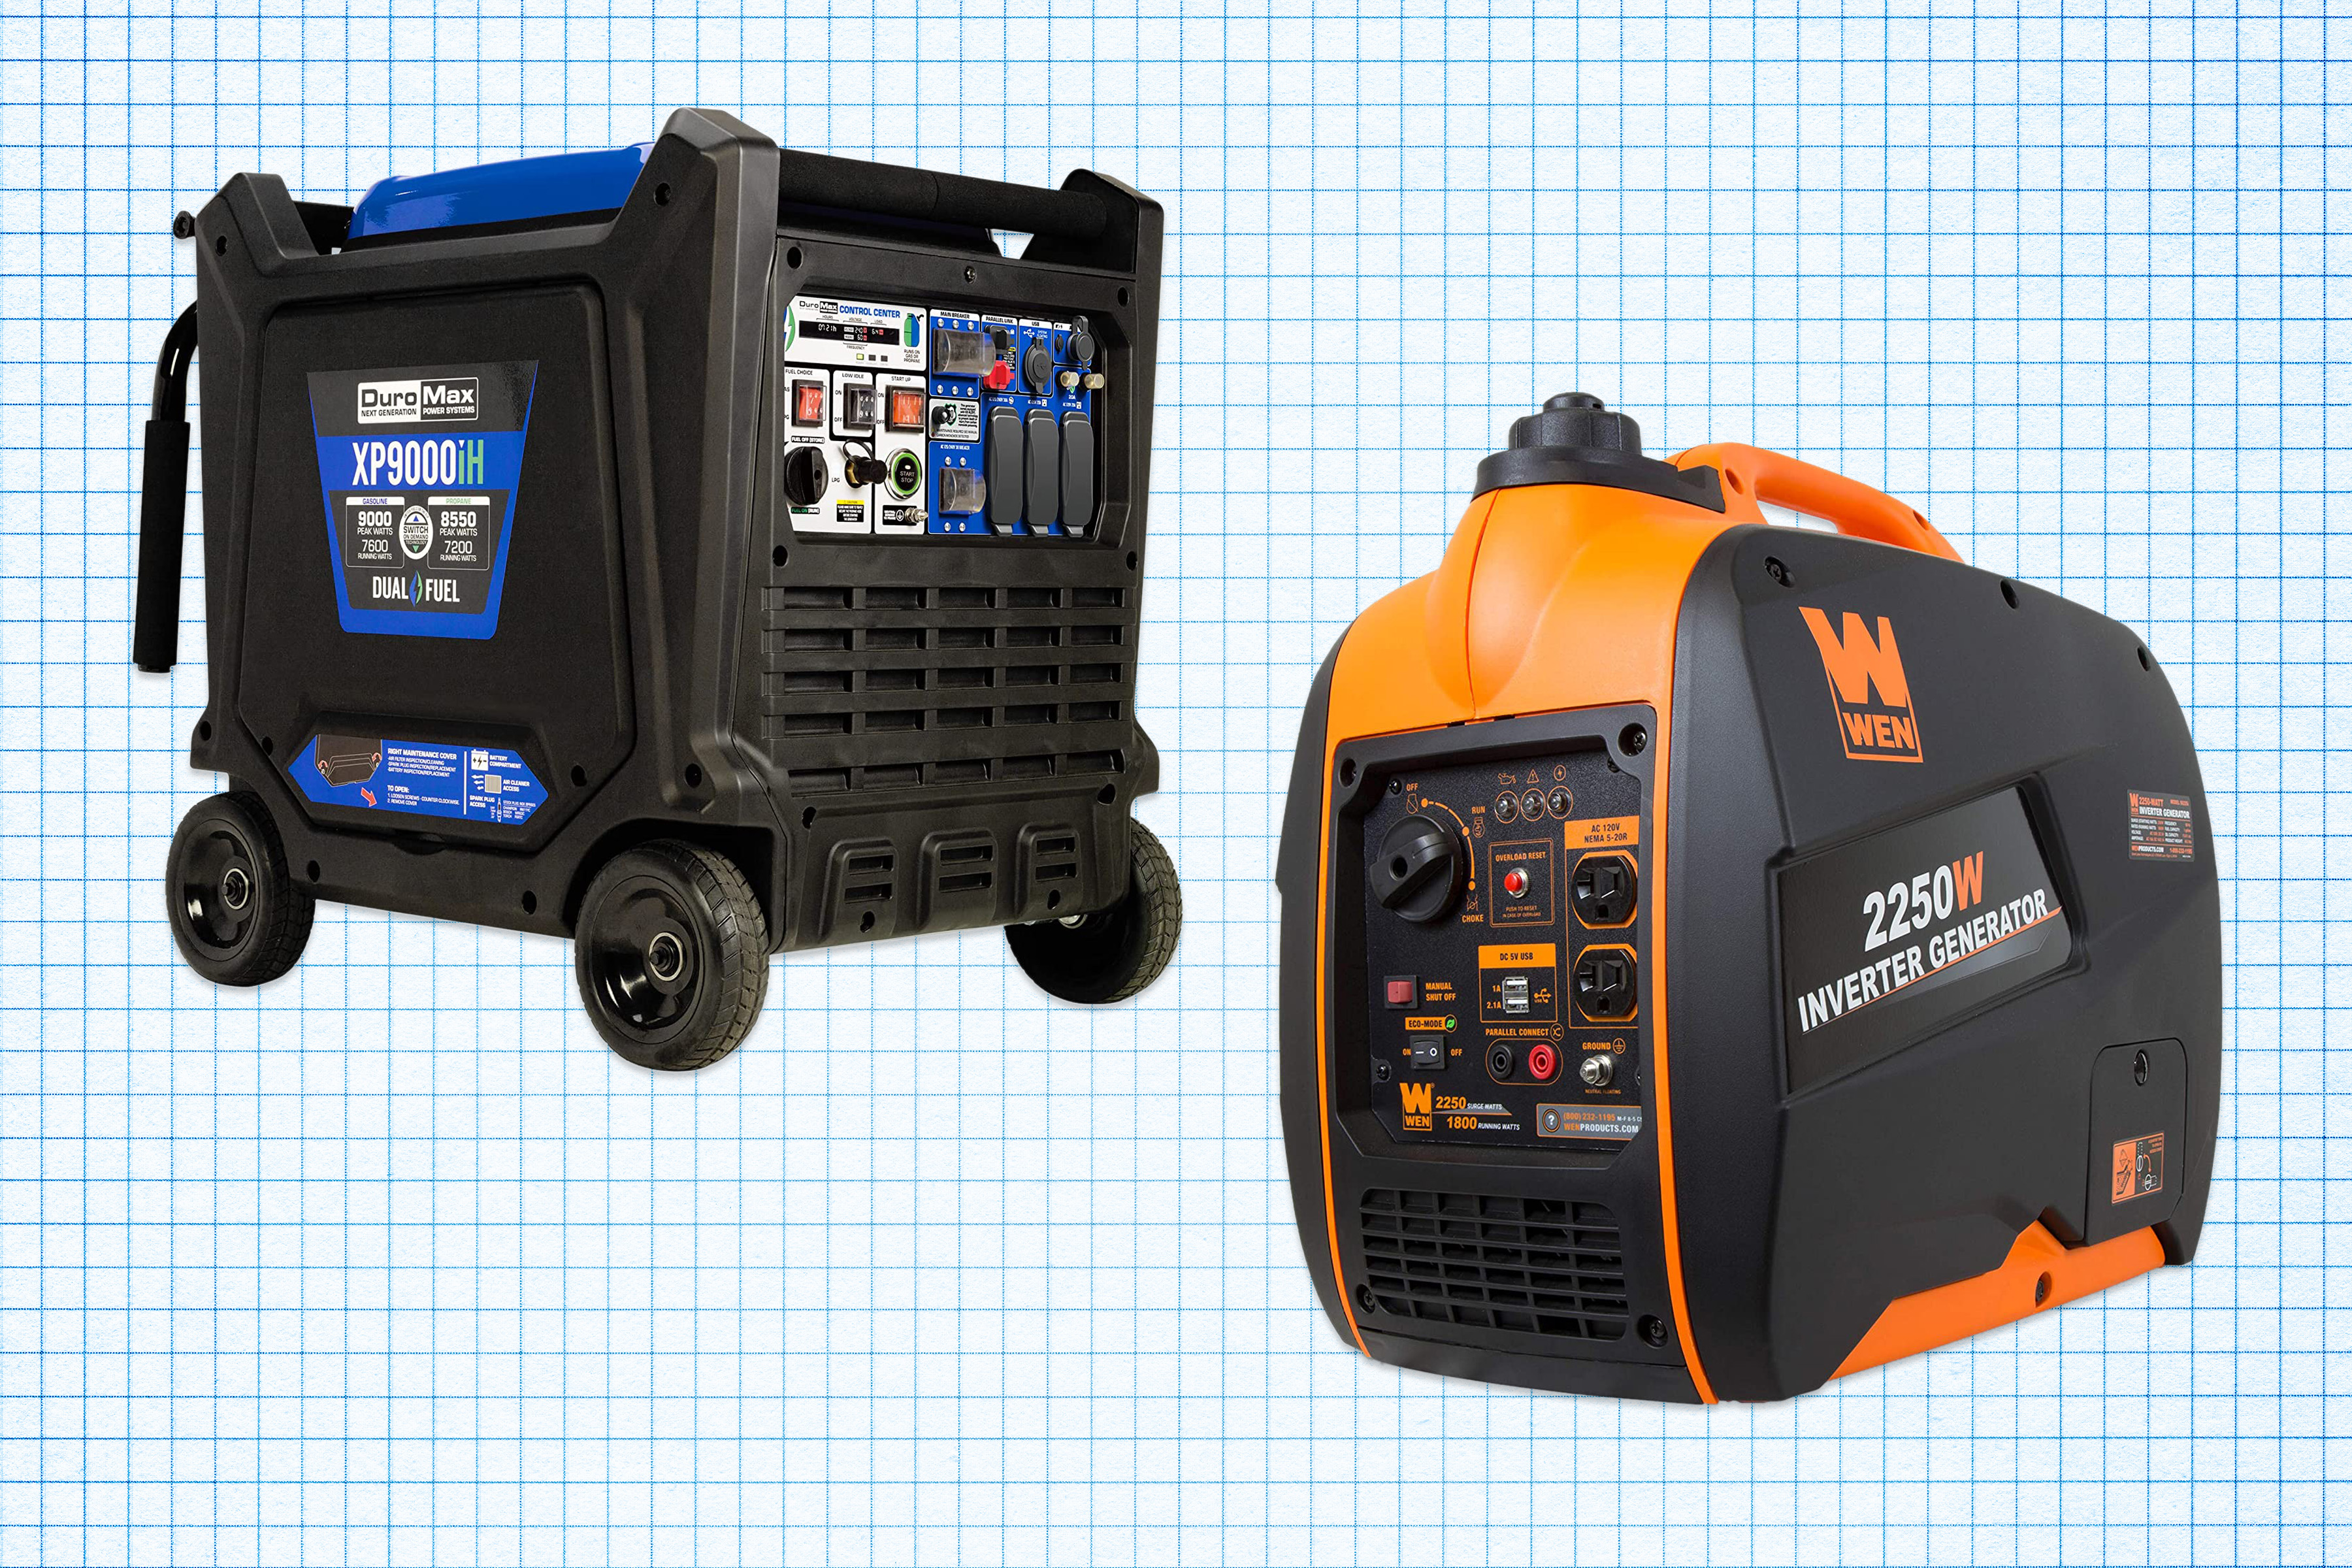 DuroMax Hybrid Portable Generator and WEN Portable Inverter Generator isolated on a white grid paper background with blue lines